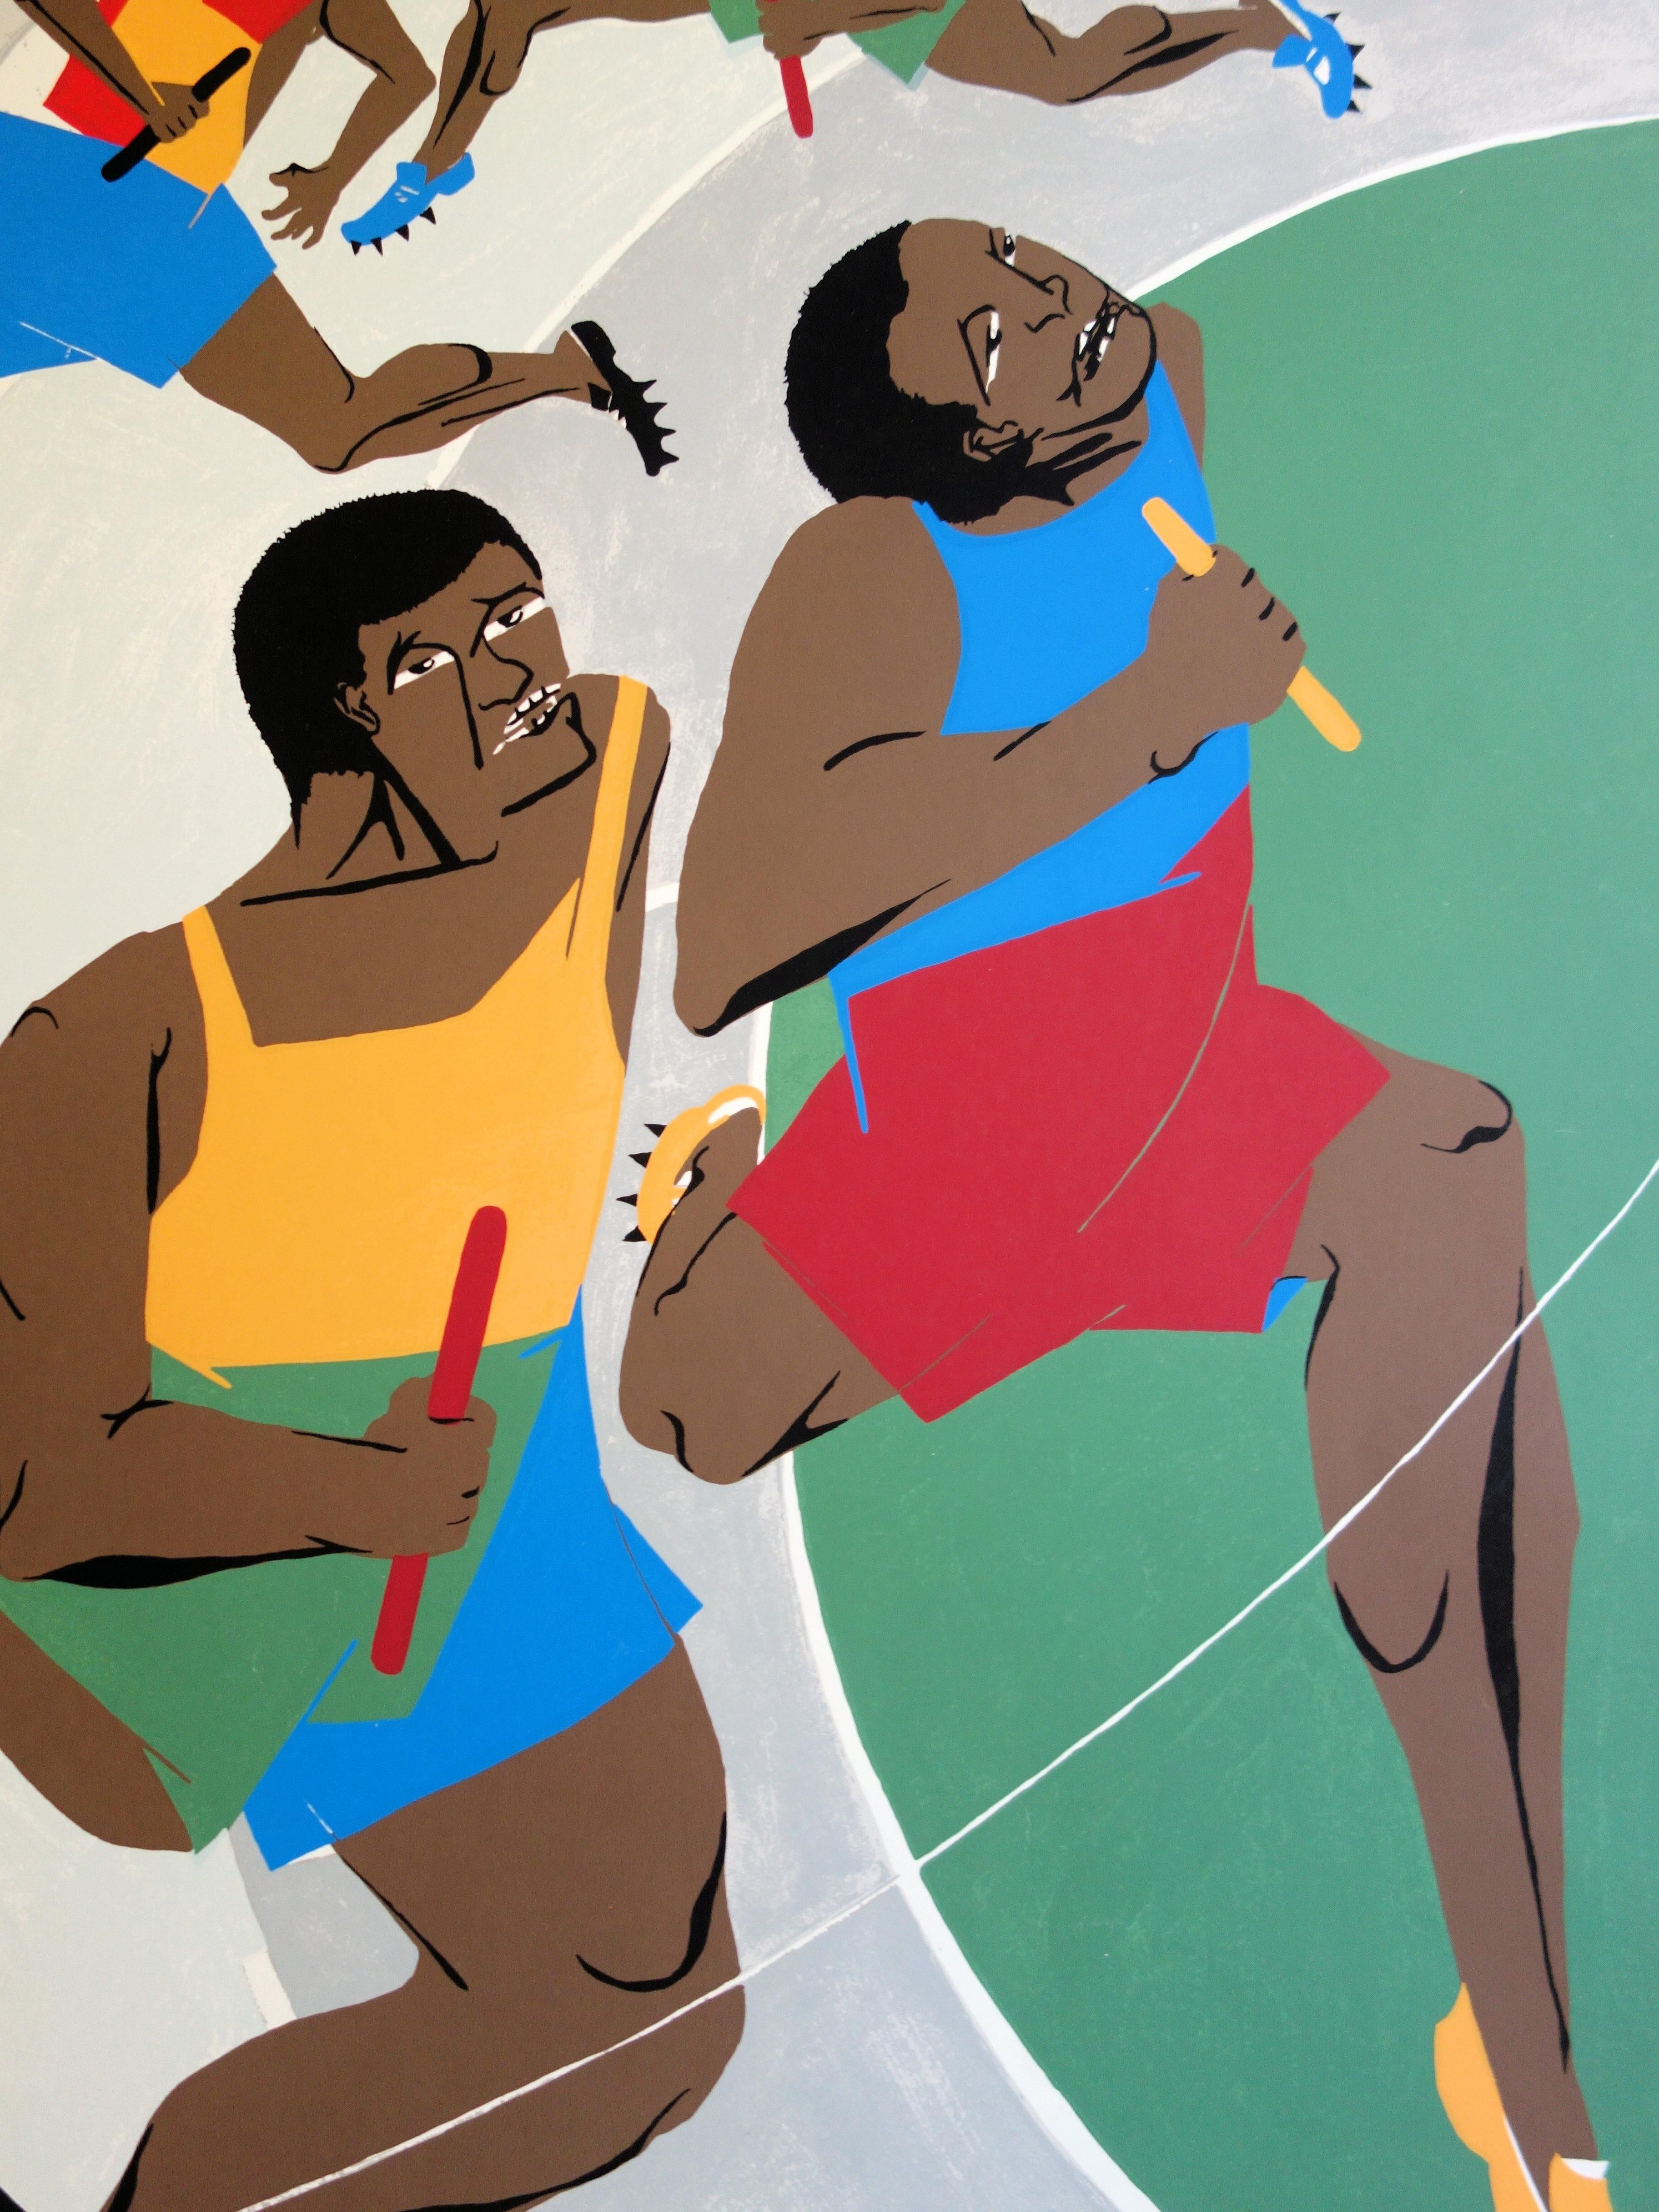 Jacob LAWRENCE
The Relay Race : Passing the Baton

Lithograph
Signature printed in the plate
On heavy paper 101 x 64 cm (c. 40 x 26 inch)
Made for the Olympic Games in Munich, 1972

Excellent condition